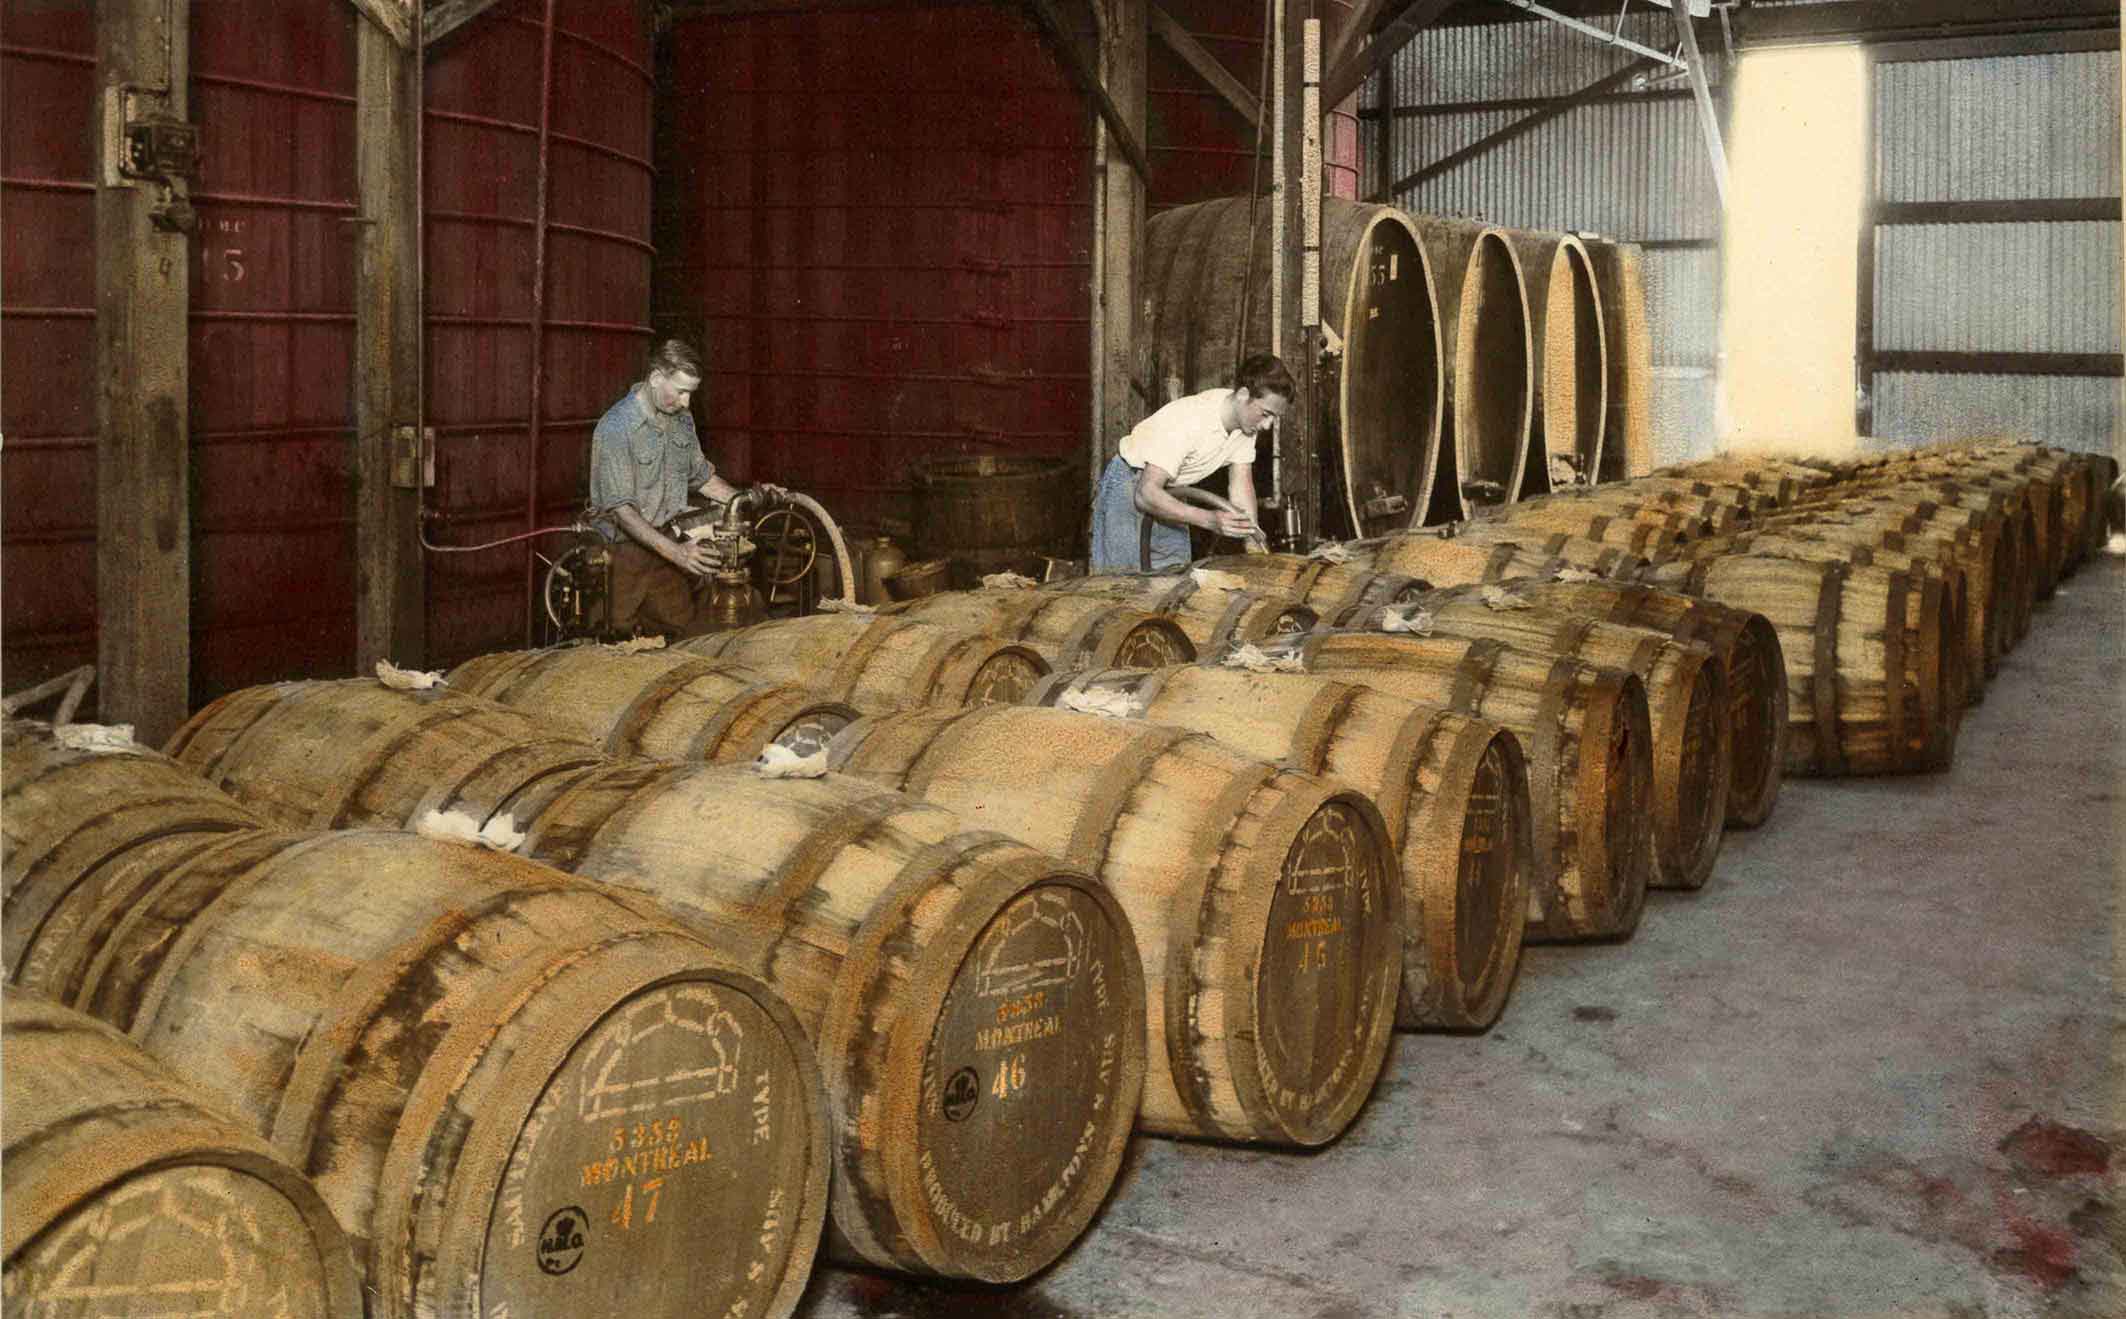 Wine barrels lined up to the right, across the image, two men working on the barrels to prepare the wine. 